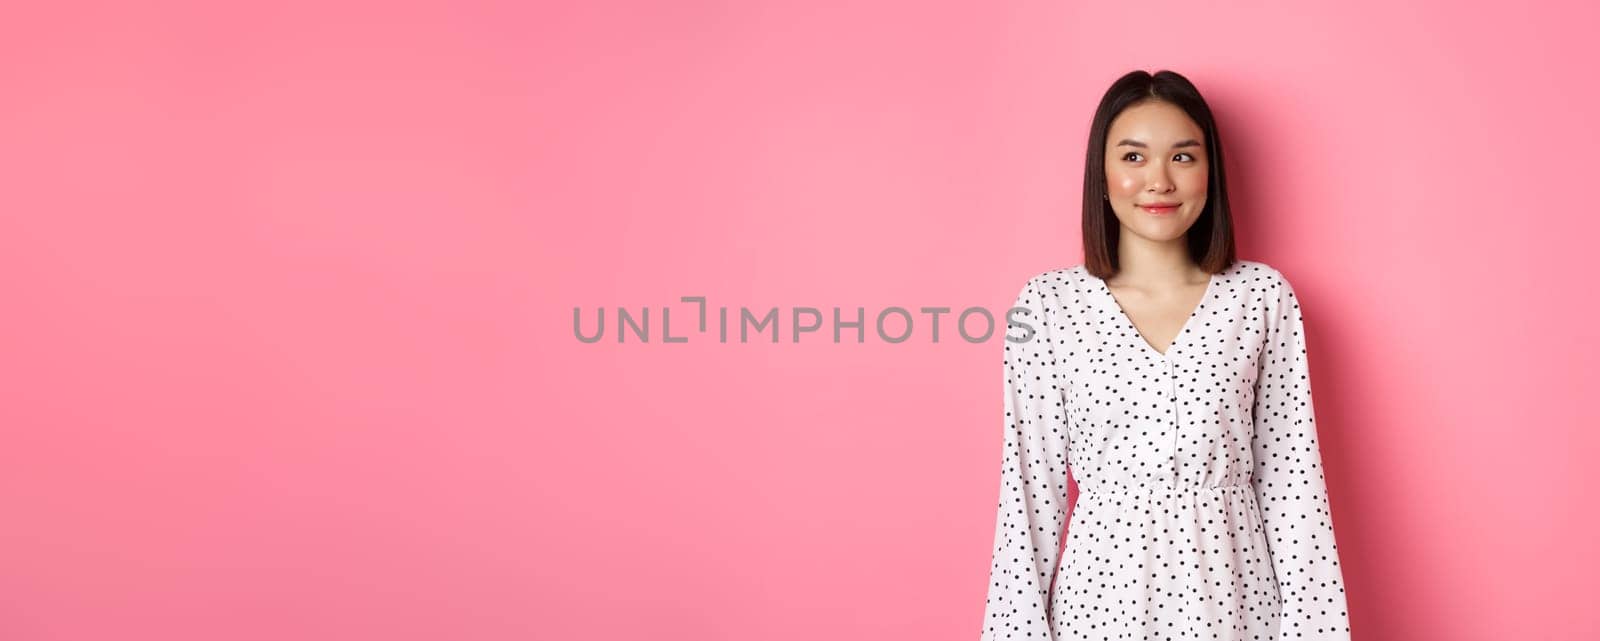 Cute asian woman smiling, looking left at copy space, standing on romantic pink background.